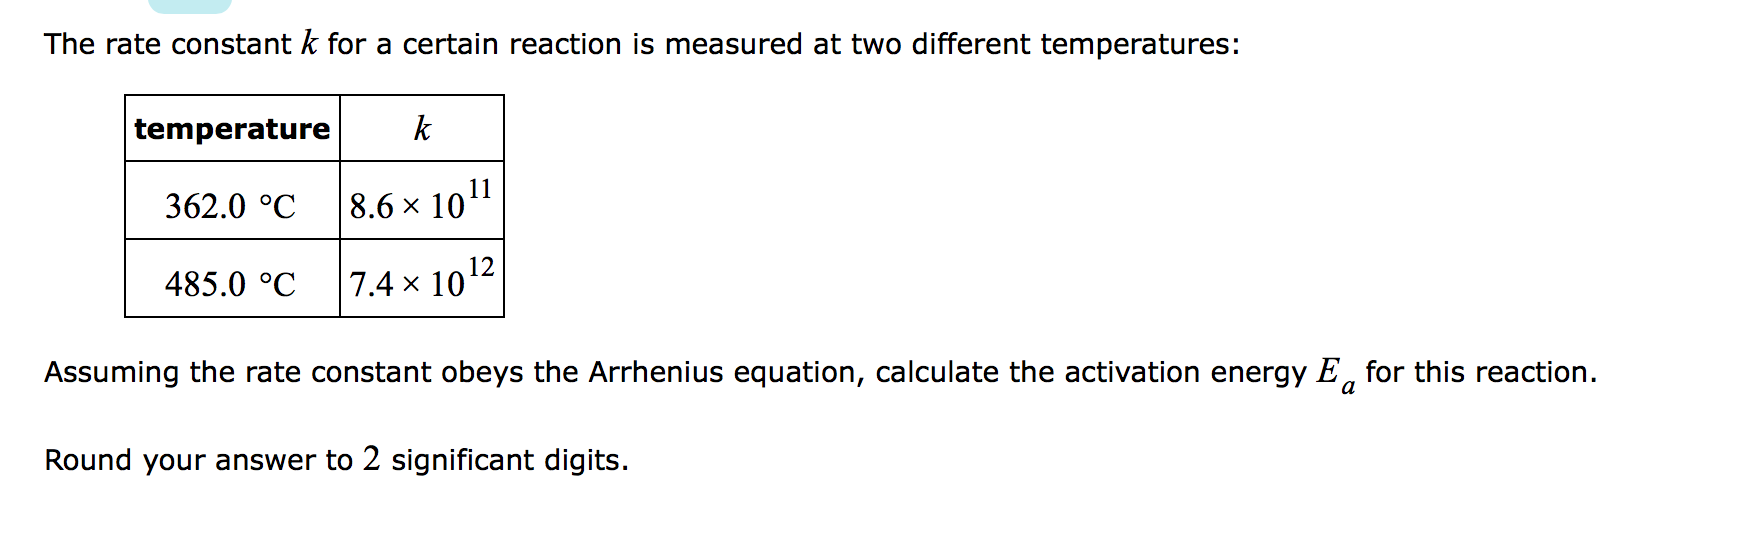 The rate constant k for a certain reaction is measured at two different temperatures:
temperature
k
362.0 °C
8.6 × 10"
485.0 °C
7.4 x 1012
Assuming the rate constant obeys the Arrhenius equation, calculate the activation energy E, for this reaction.
a
Round your answer to 2 significant digits.
